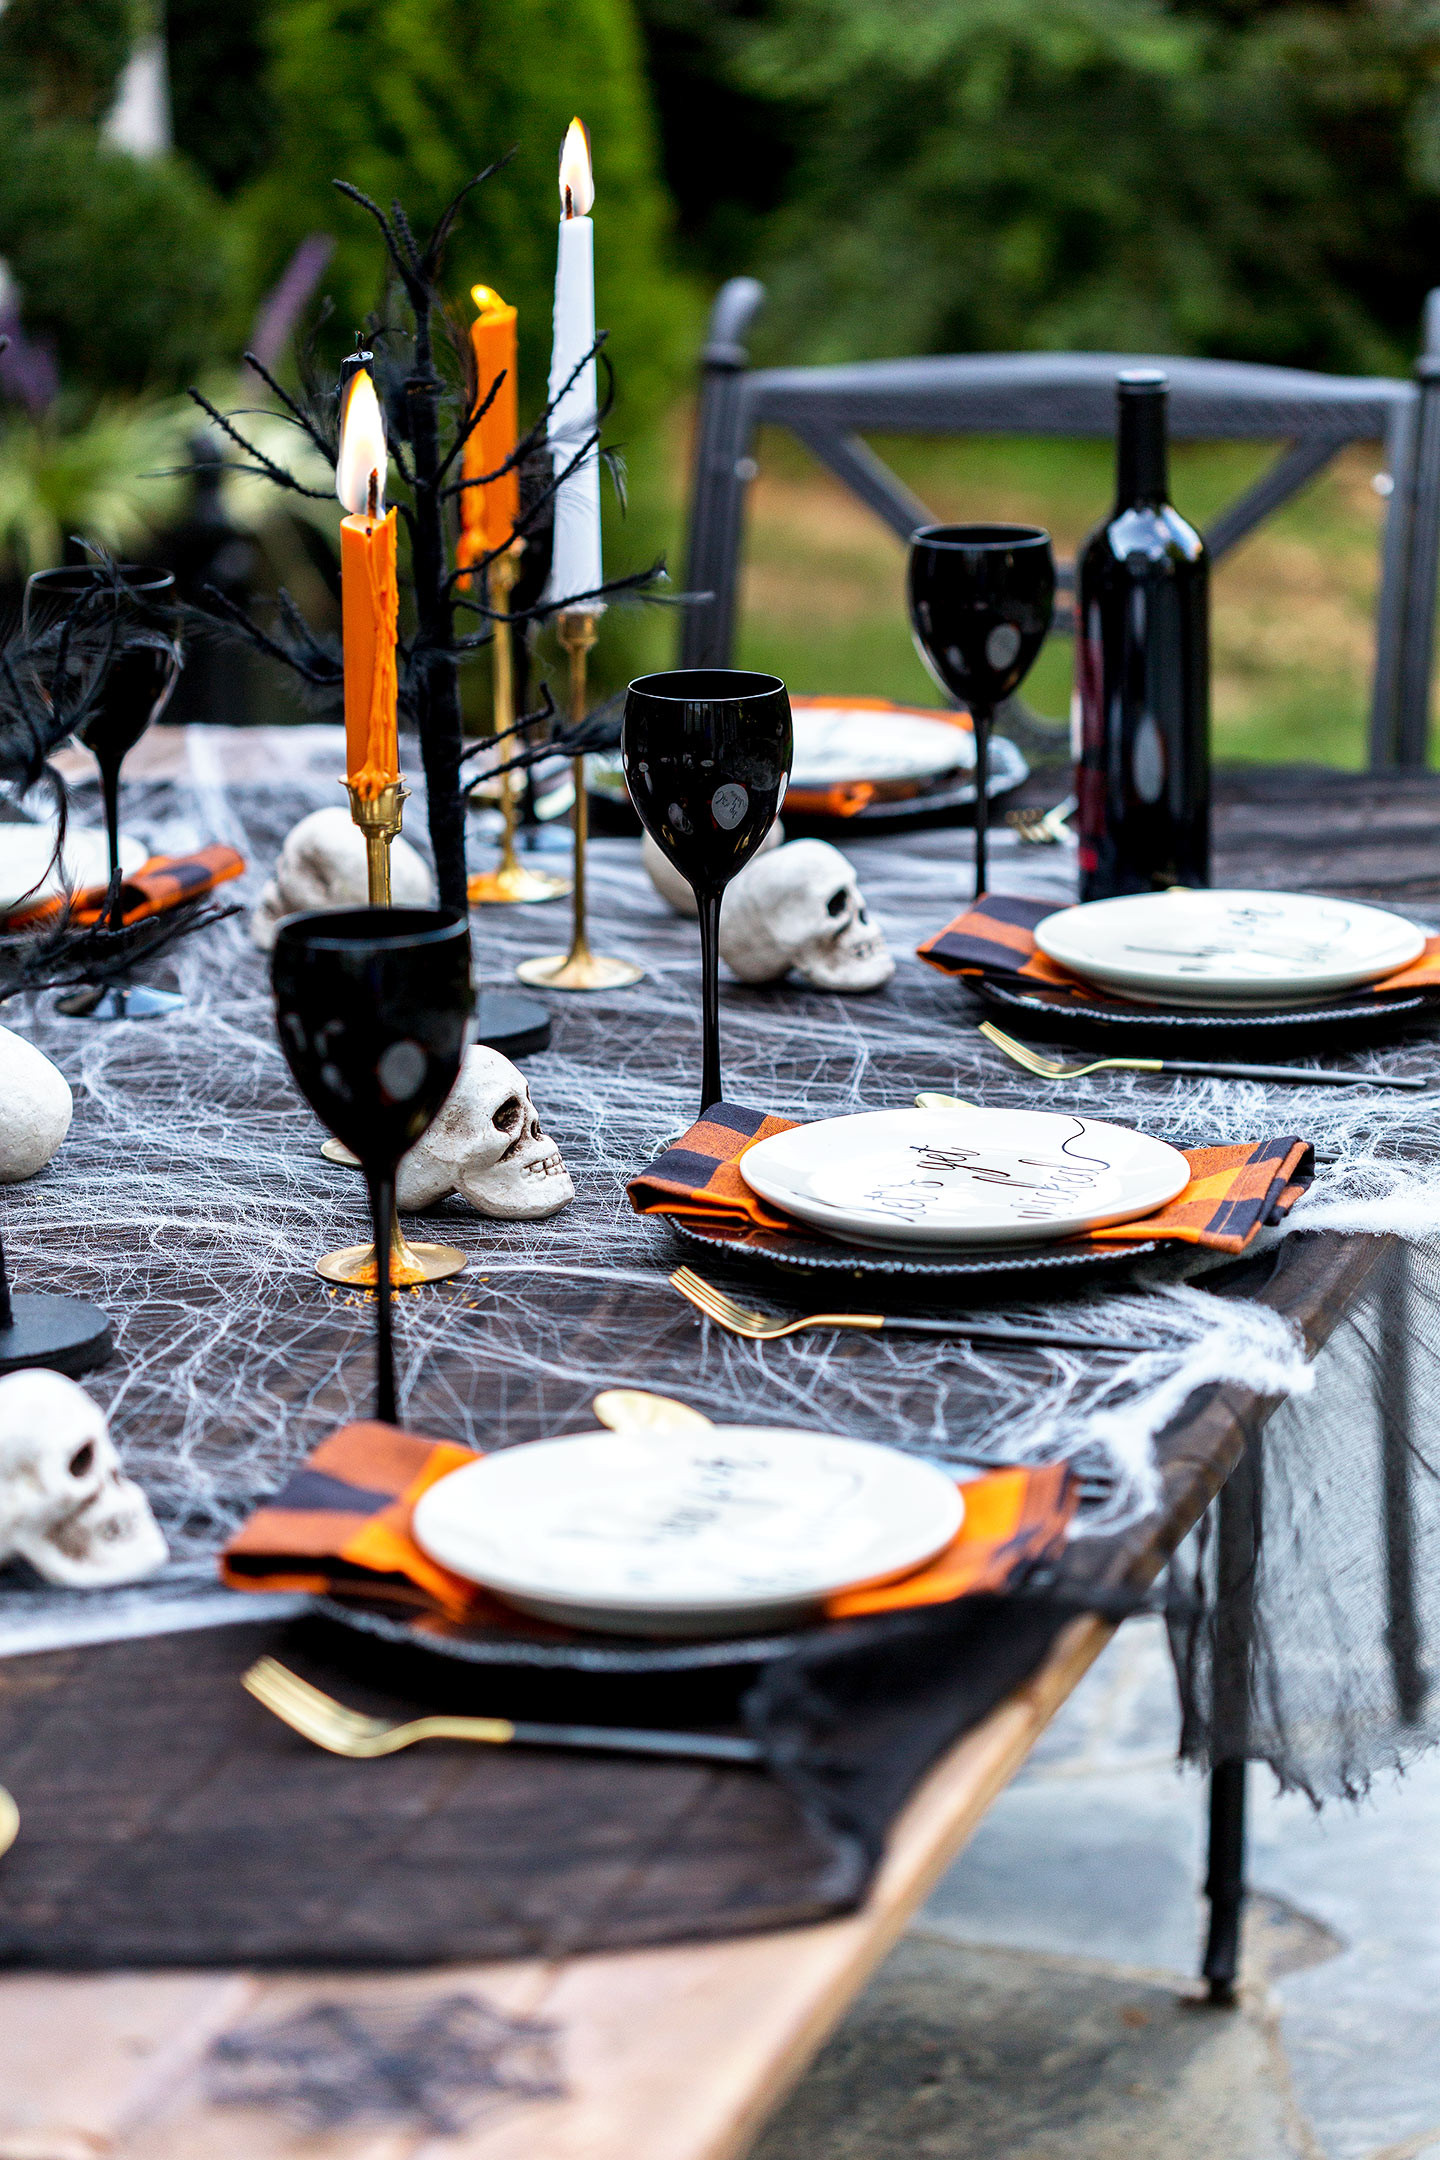 Halloween Party Ideas For Adults Content
 Adult Halloween Party Decorations & Halloween Menu Ideas